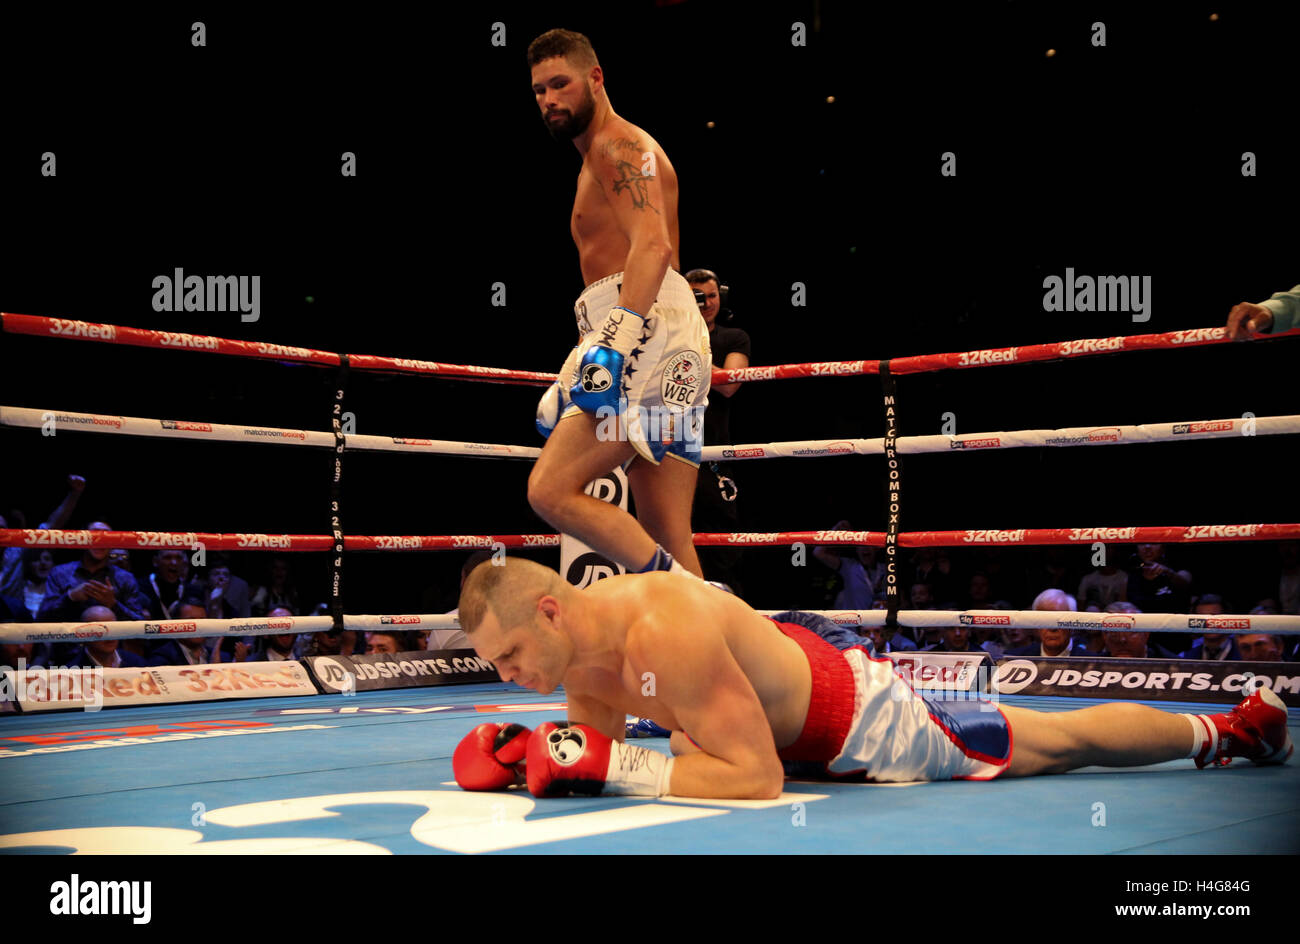 Echo Arena, Liverpool , UK 15th October 2016. Tony Bellew v BJ Flores Matchroom Boxing Fight Night.  Tony Bellew (Liverpool)  knocks down  BJ Flores (USA) during their WBC World Cruiserweight  Championship bout at Echo Arena, Liverpool  Credit: Stephen Gaunt/Touchlinepics.com/Alamy Live News Stock Photo